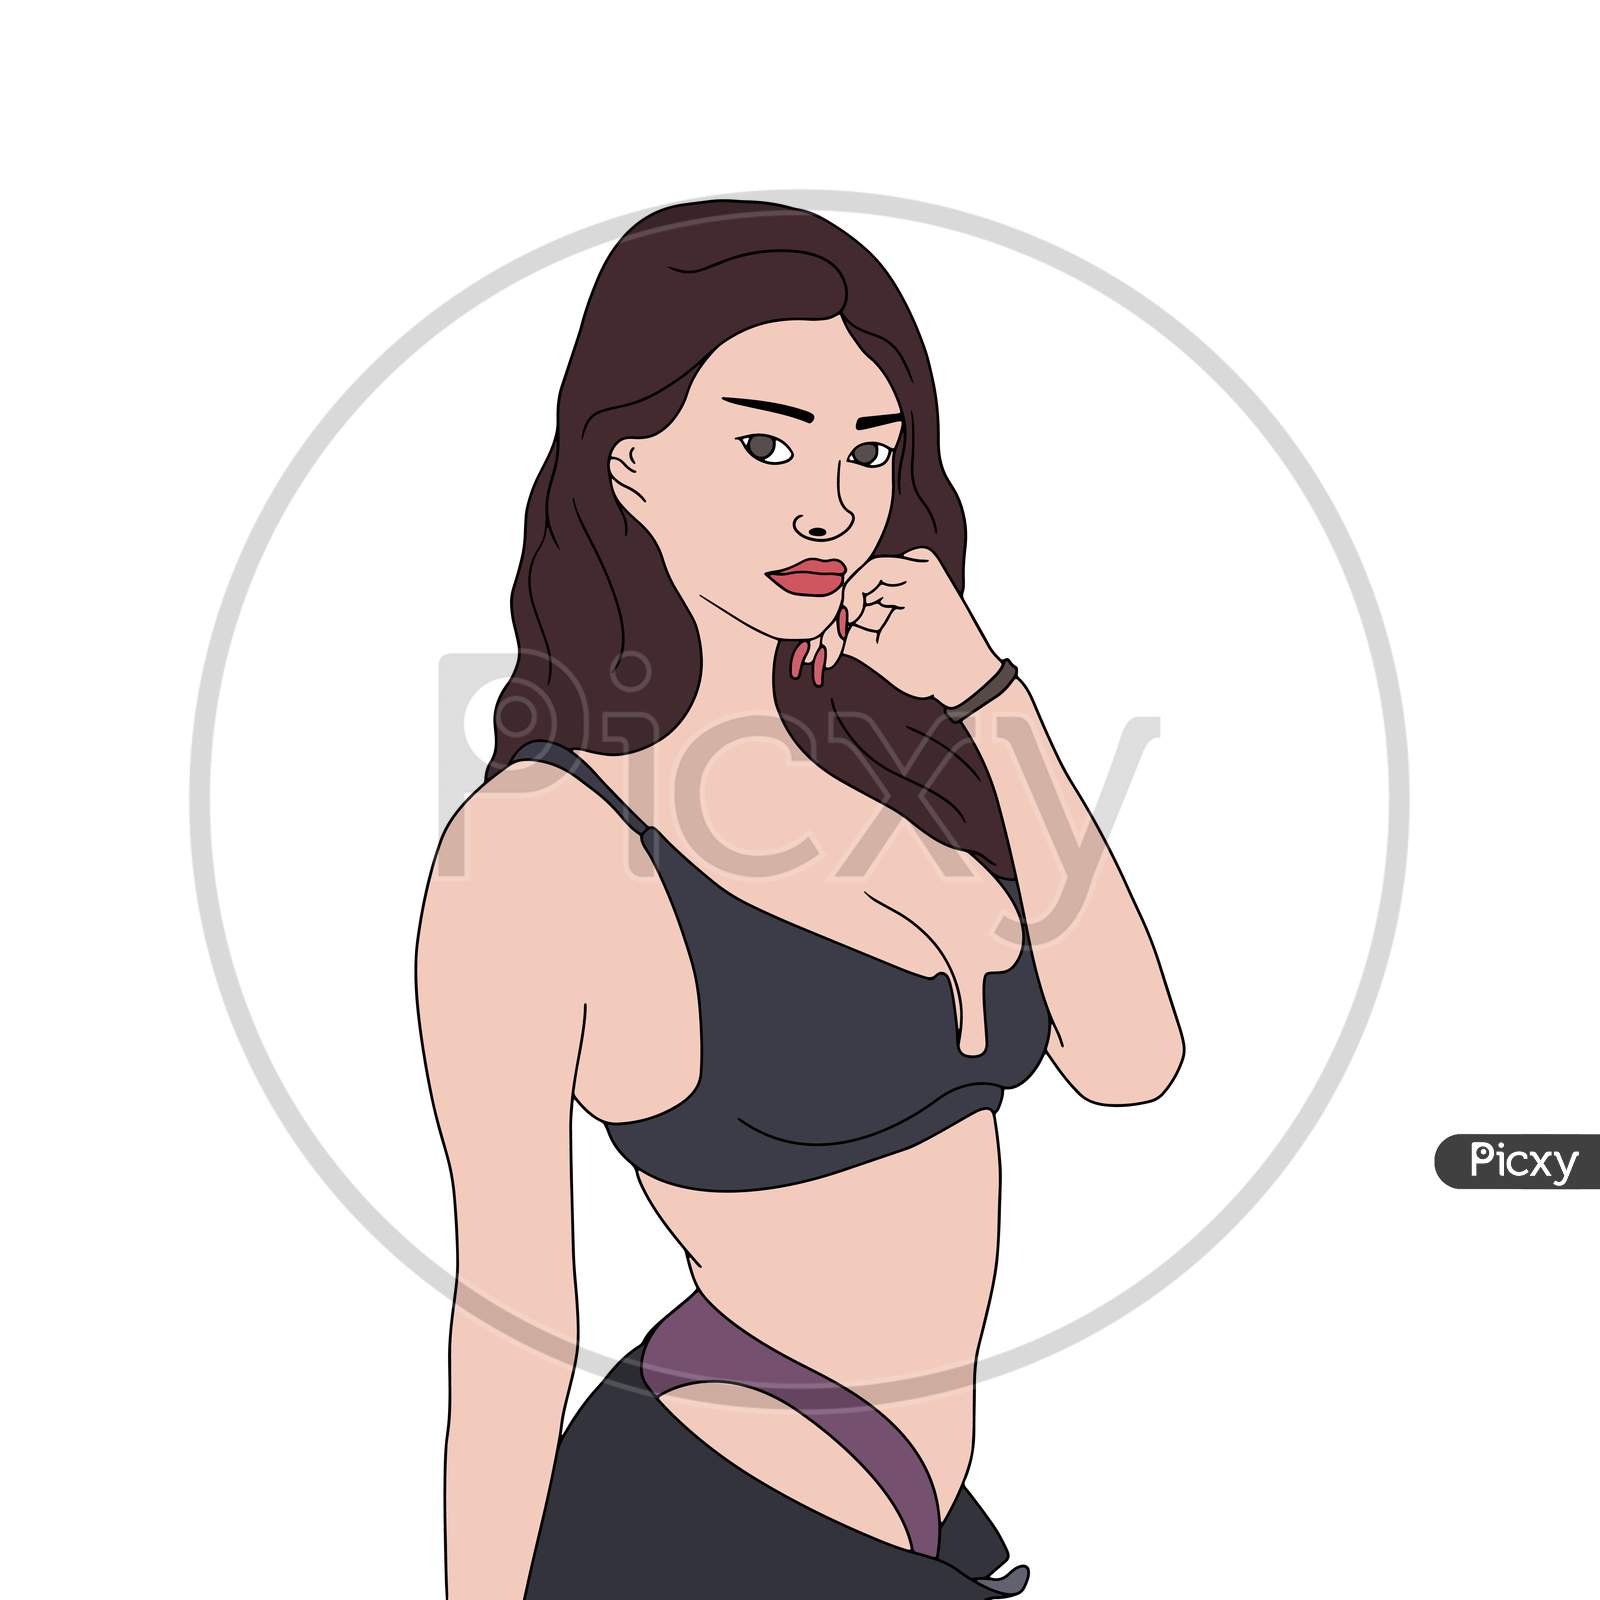 Naughty Adult Girl - Hand Drawn Illustration On White Background